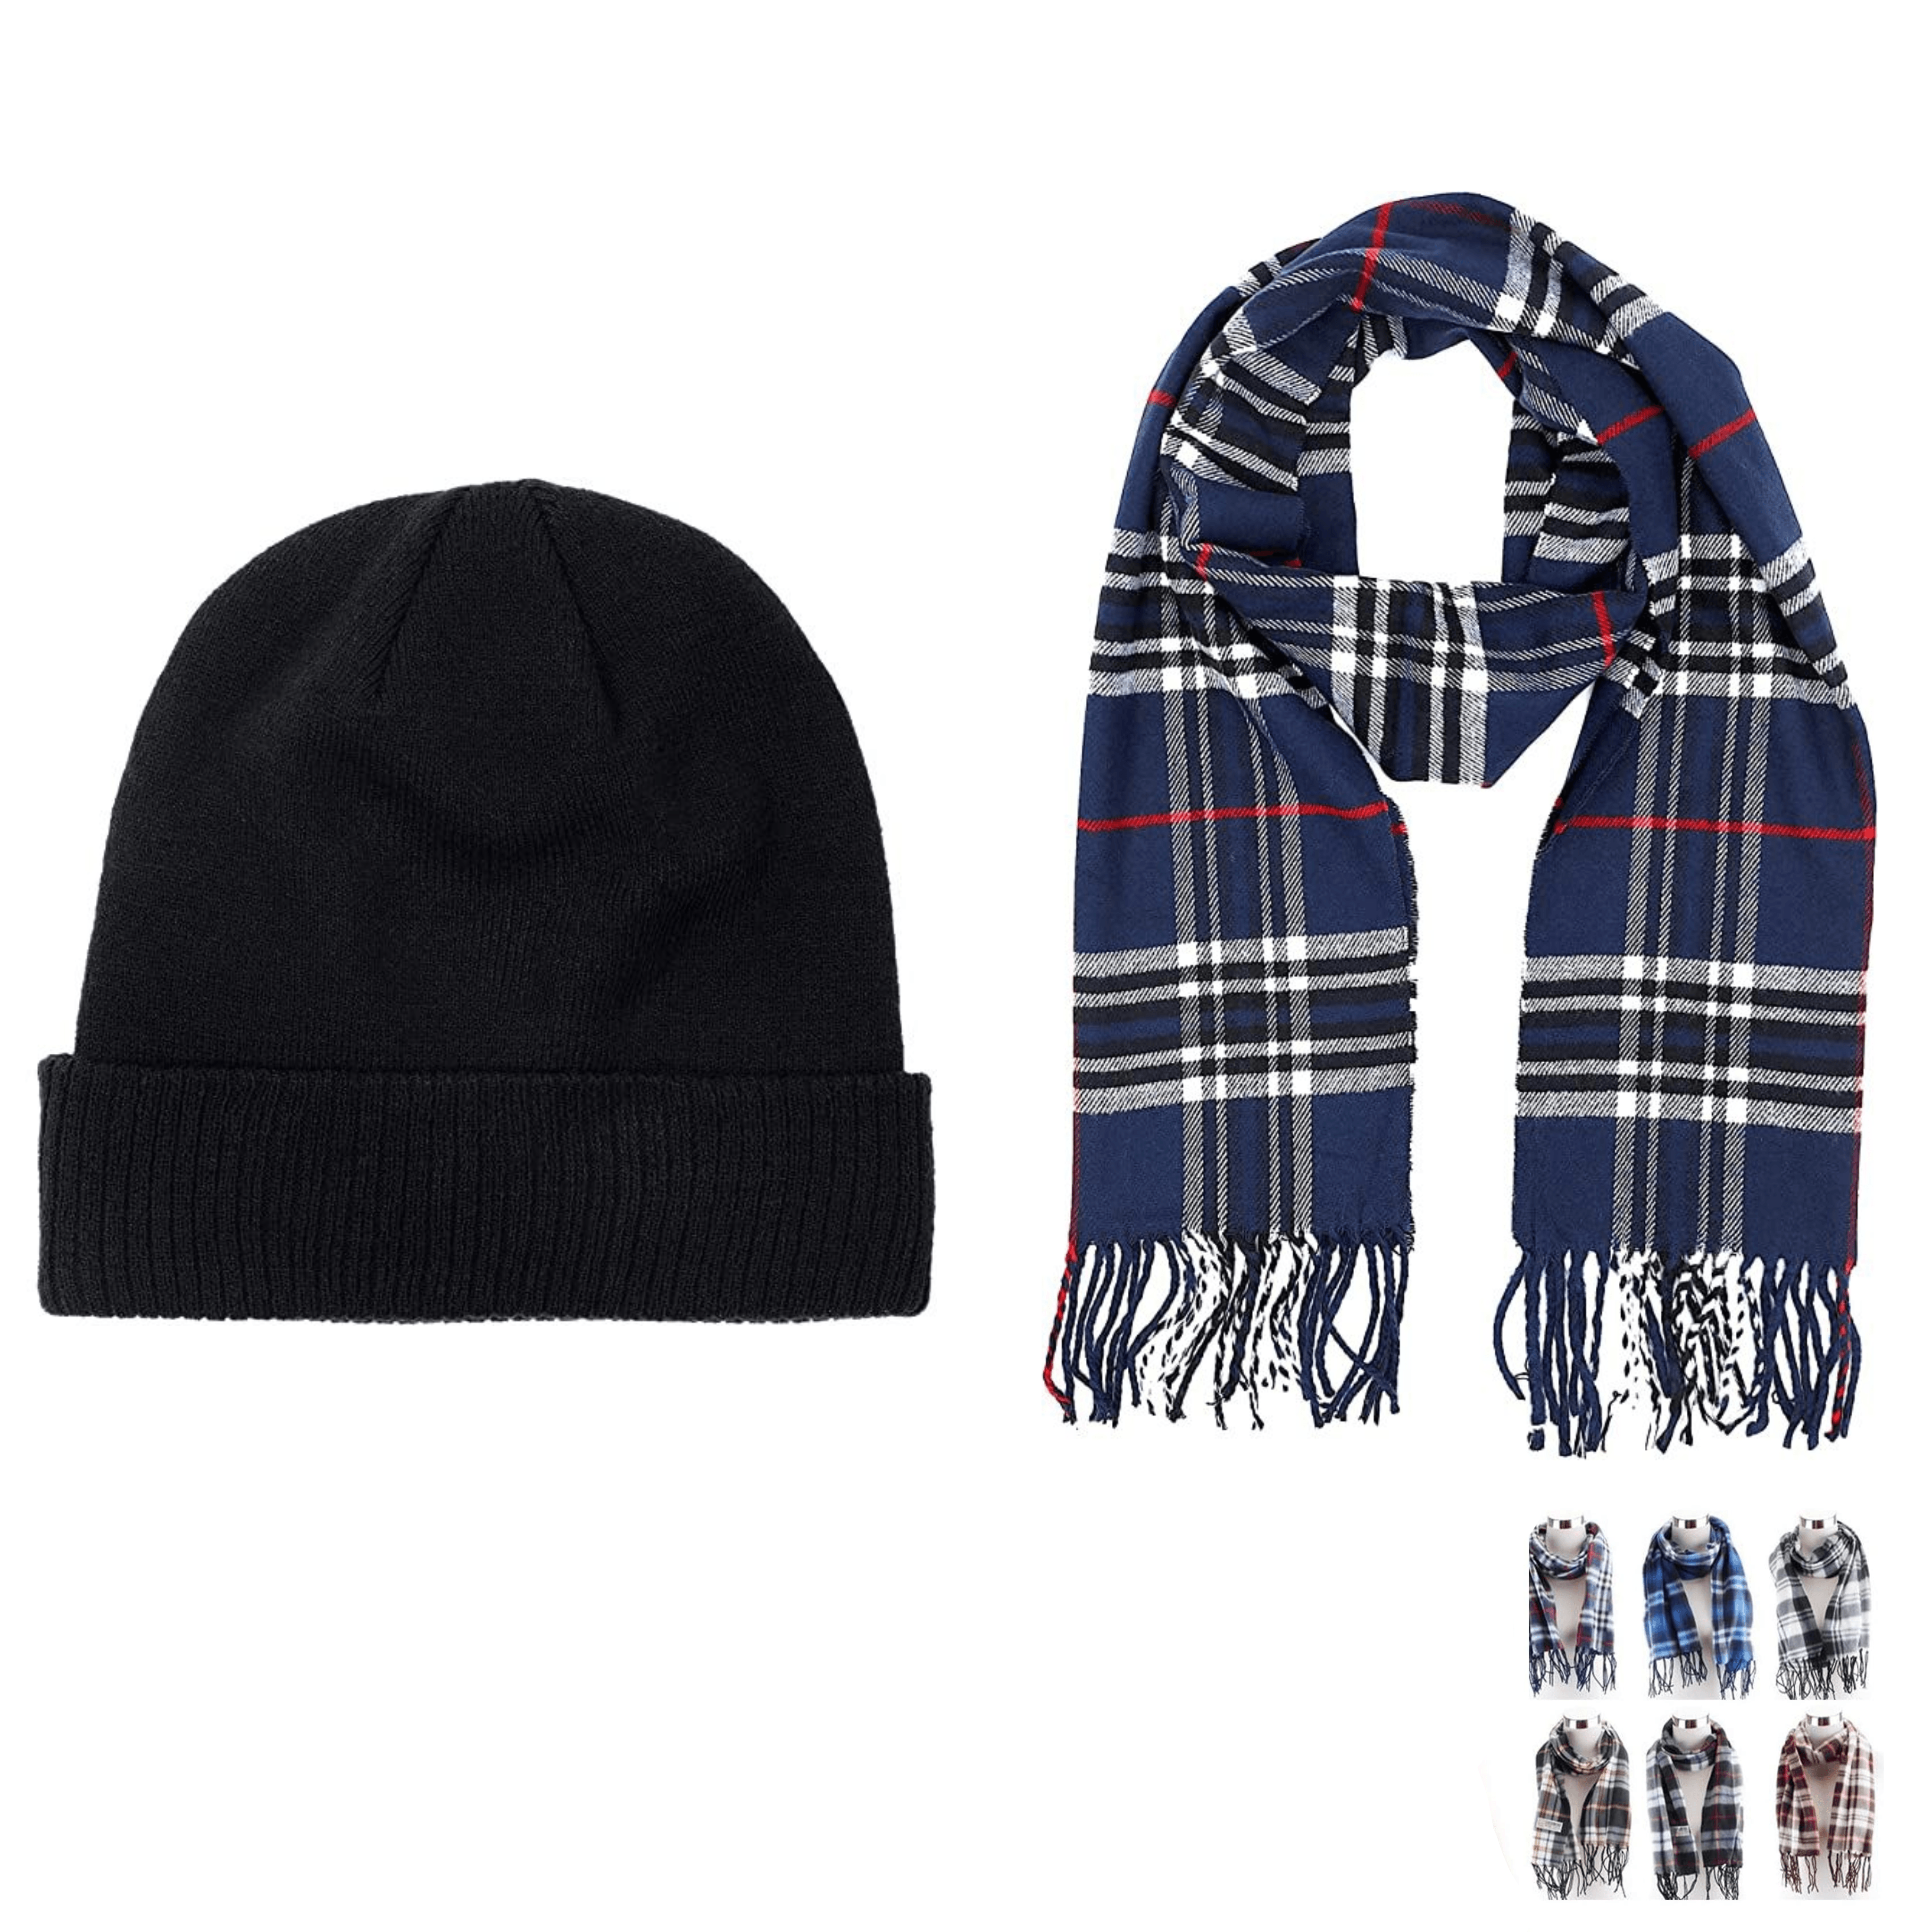 Adult Fleece Lined Winter Hat with Fleece Plaid Scarf Thermware Winter Bundle